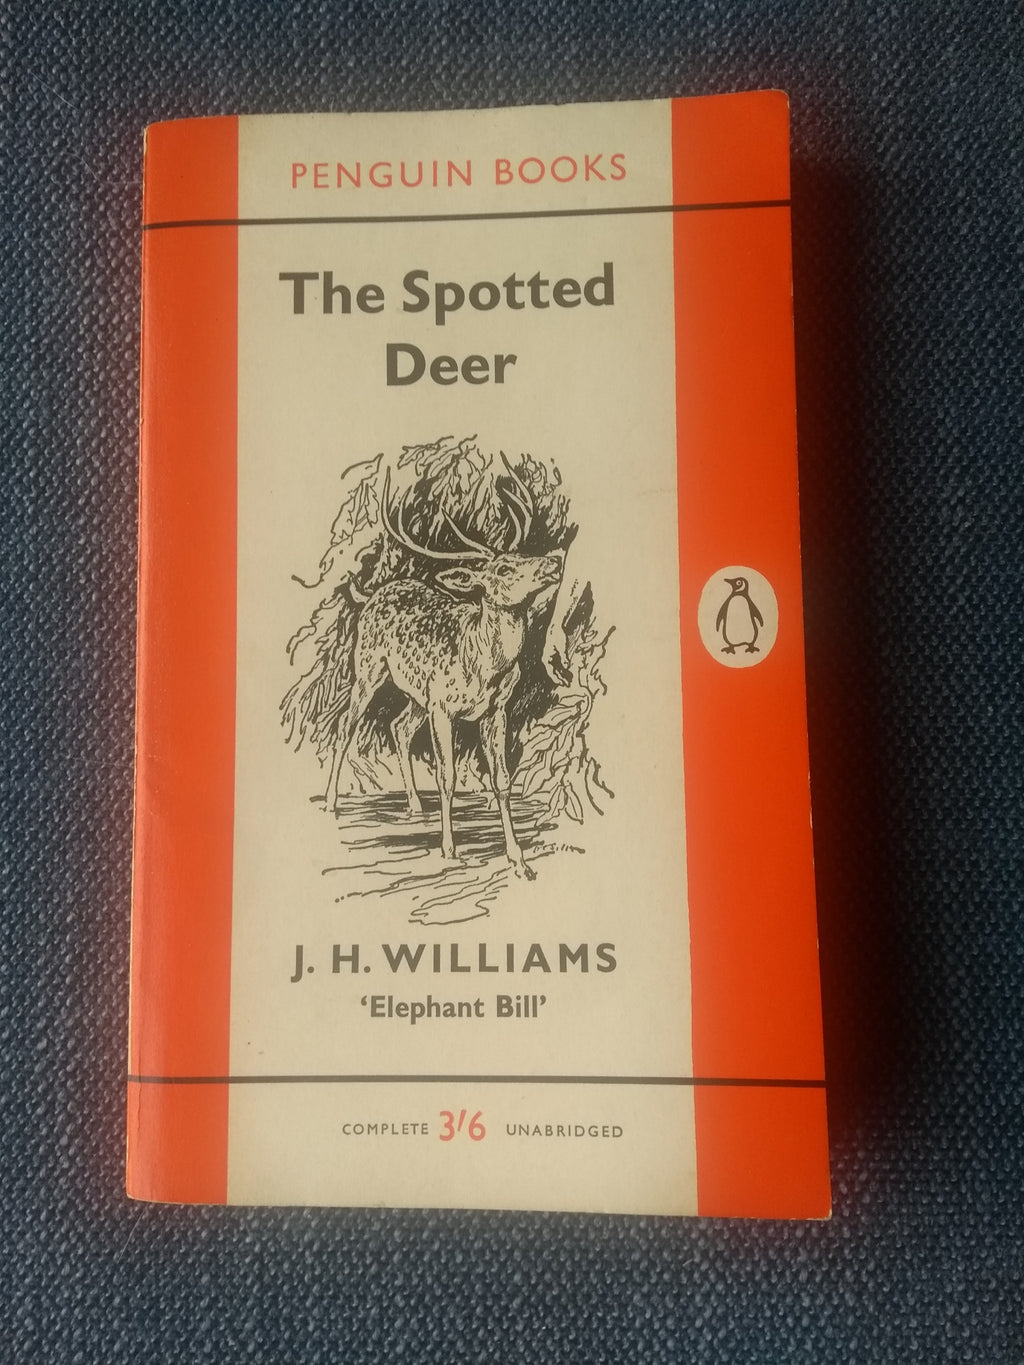 The Spotted Deer, by J.H. Williams 'Elephant Bill'